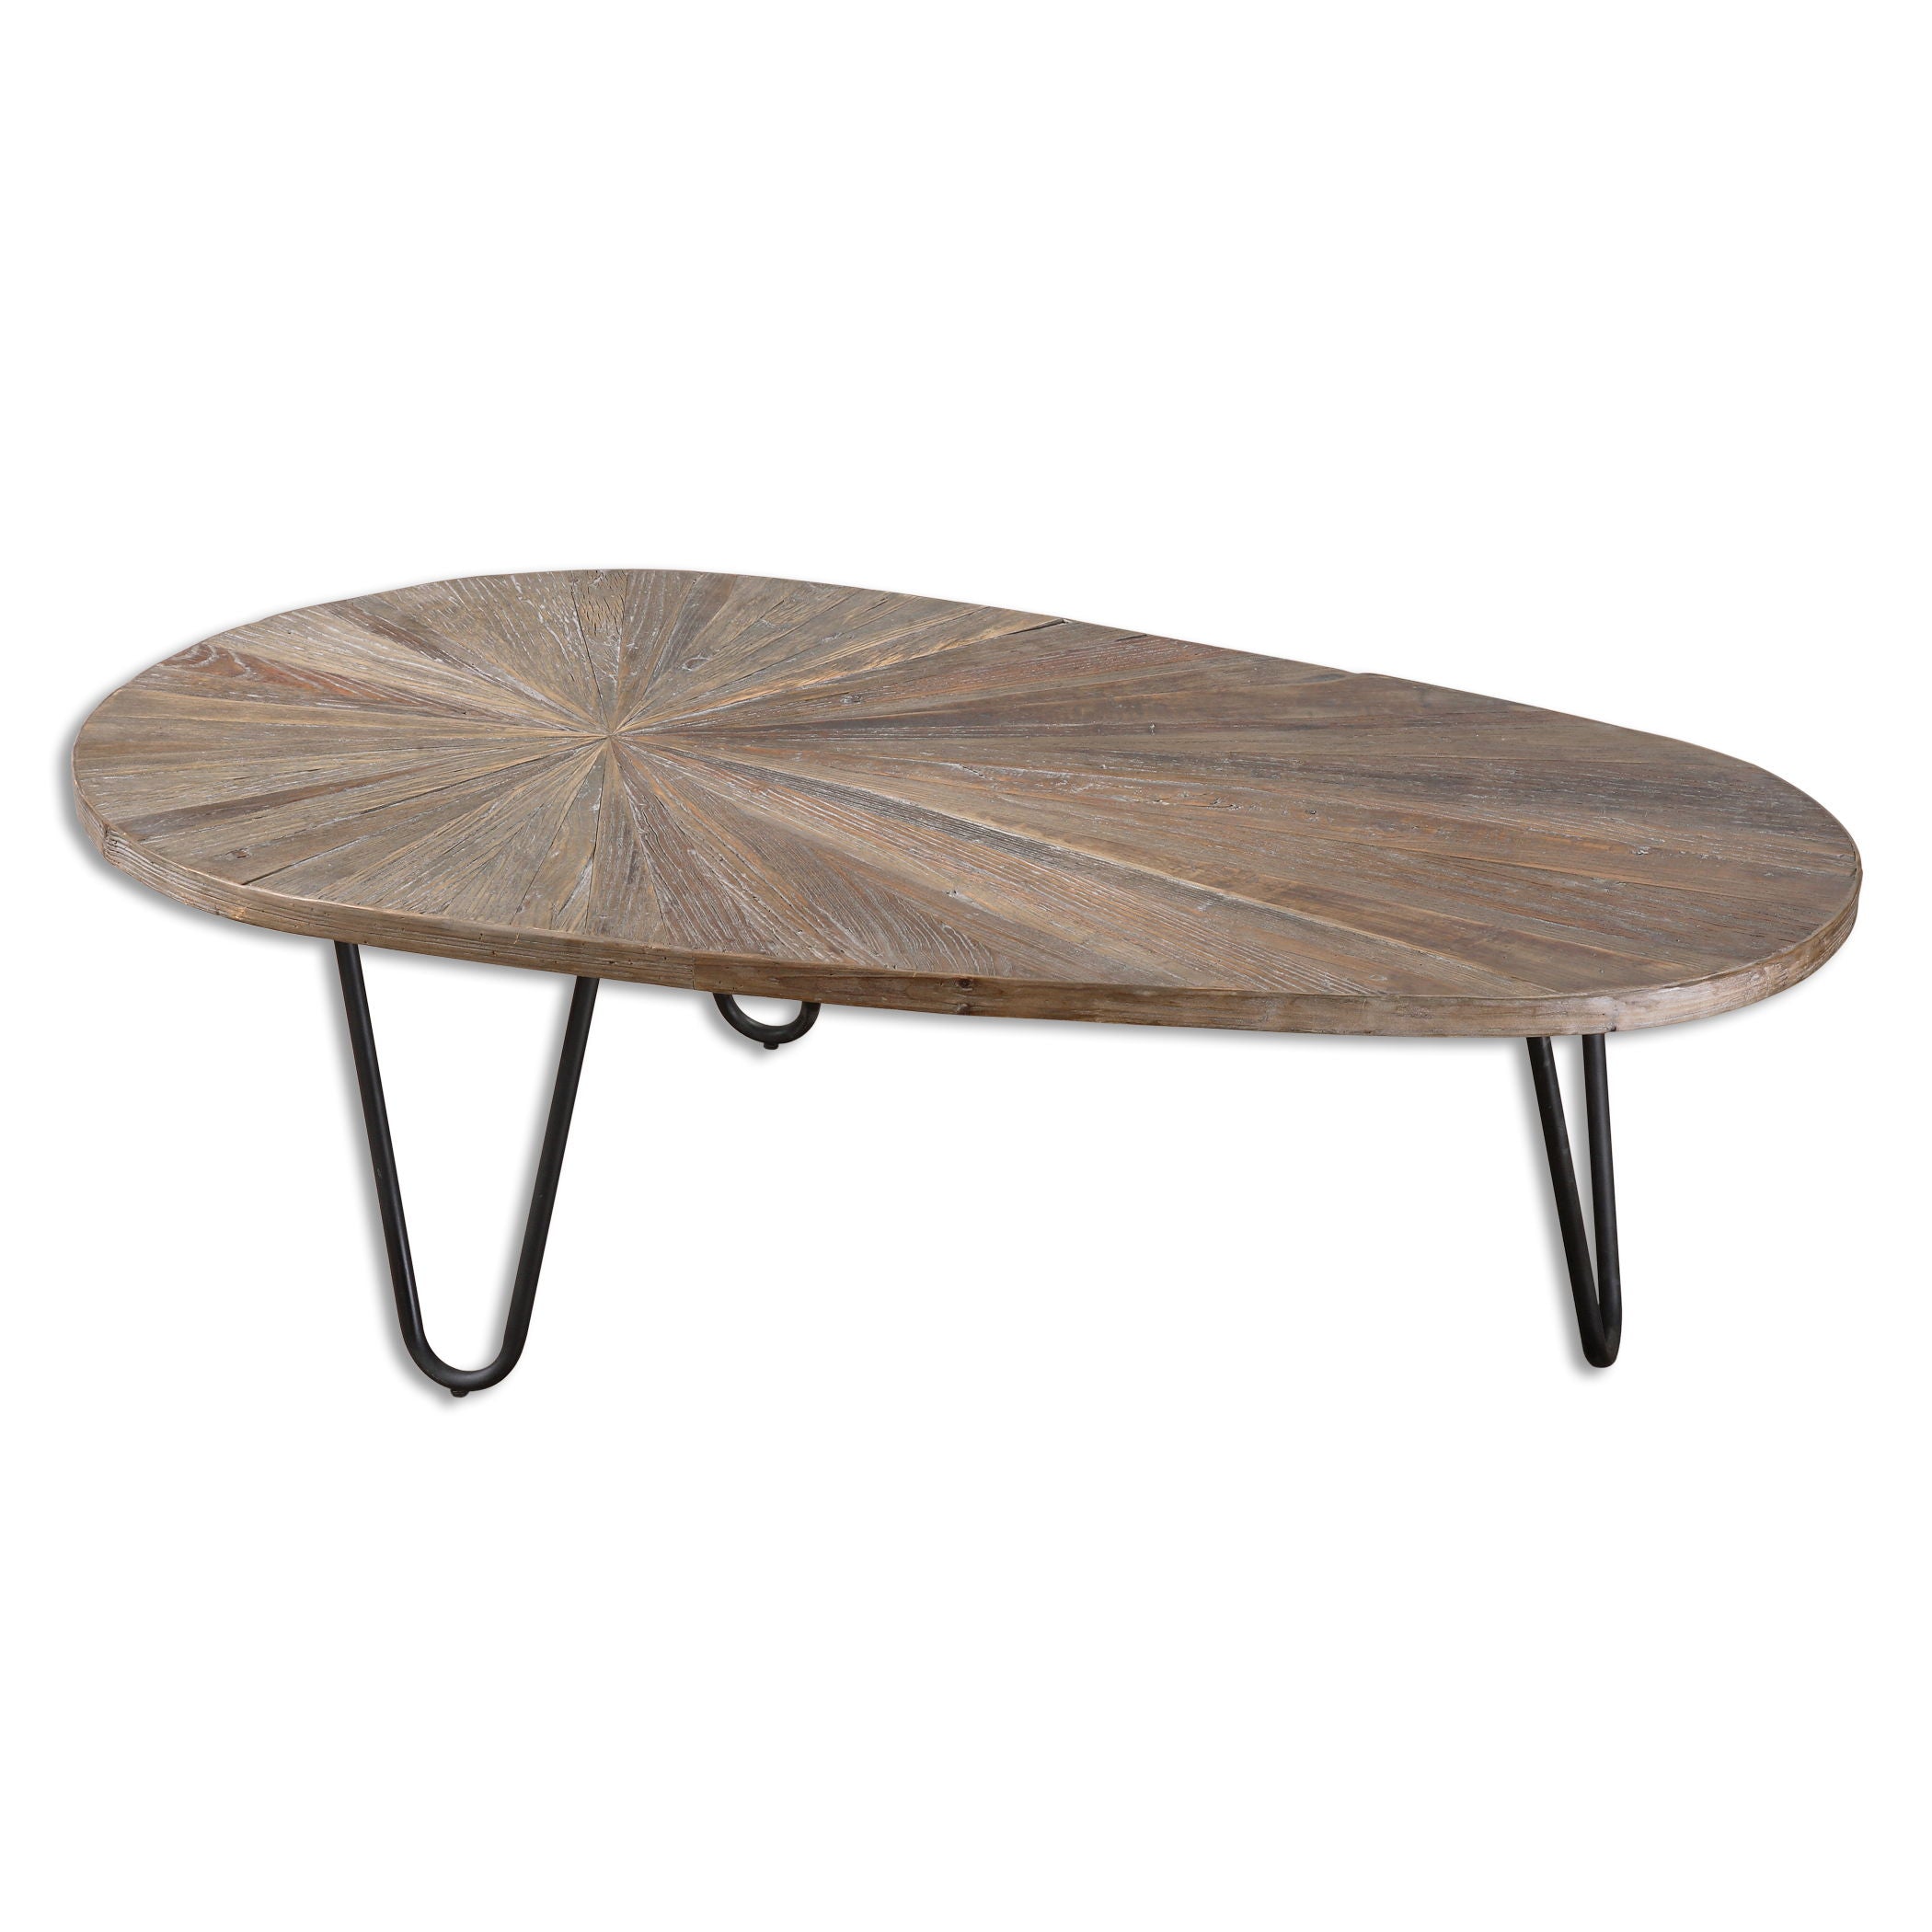 Leveni - Wooden Coffee Table - Light Brown